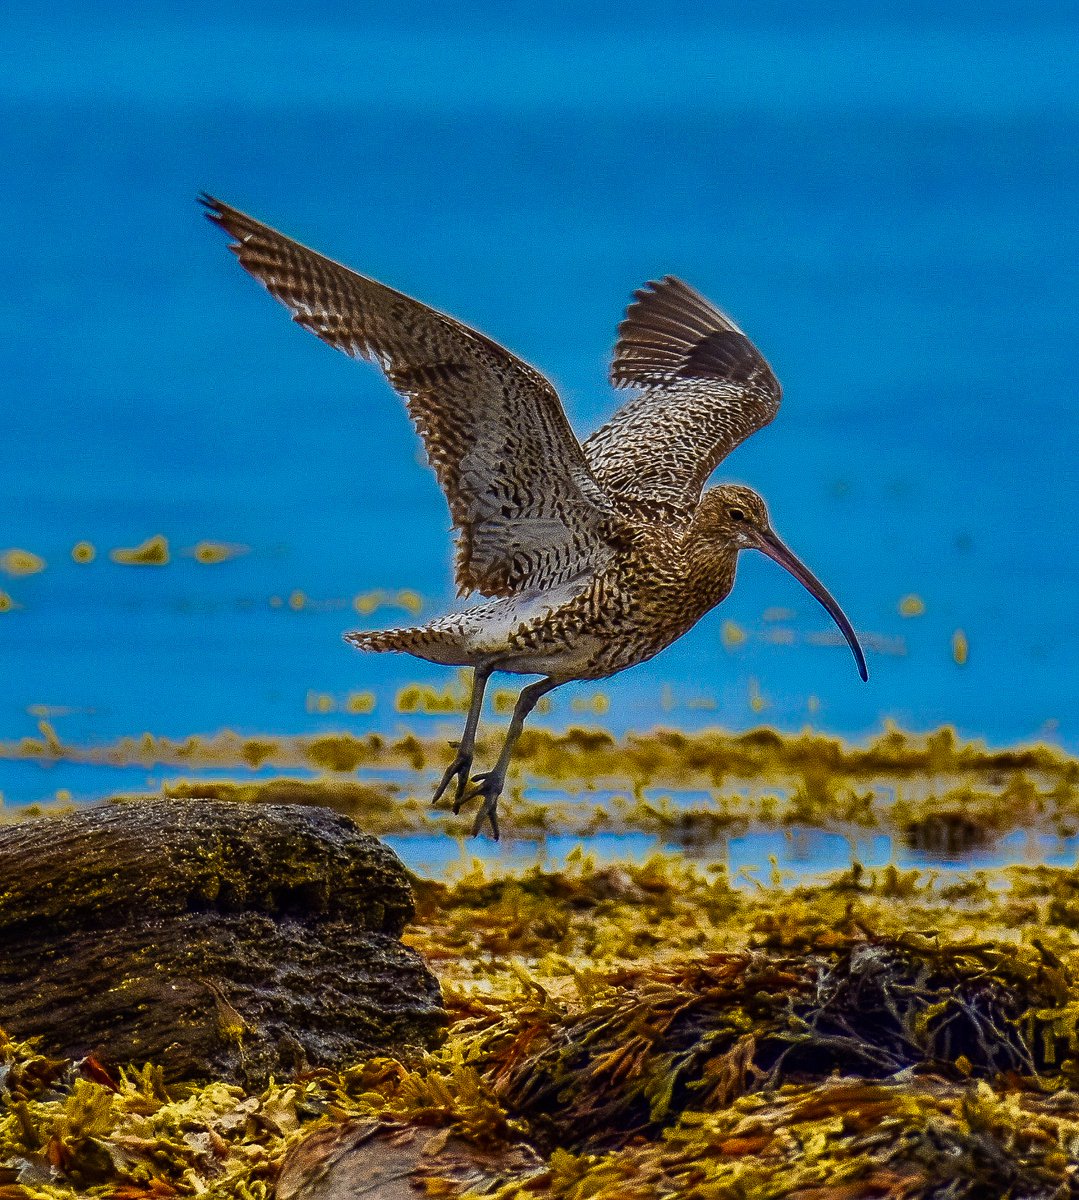 World Curlew Day (April 21) raises the awareness of all species of curlew worldwide. #WorldCurlewDay #nature #NaturePhotography #StMarysLighthouse #tynemouth #birds #BirdsOfTwitter #curlew #nikon #nikonphotography @UKNikon